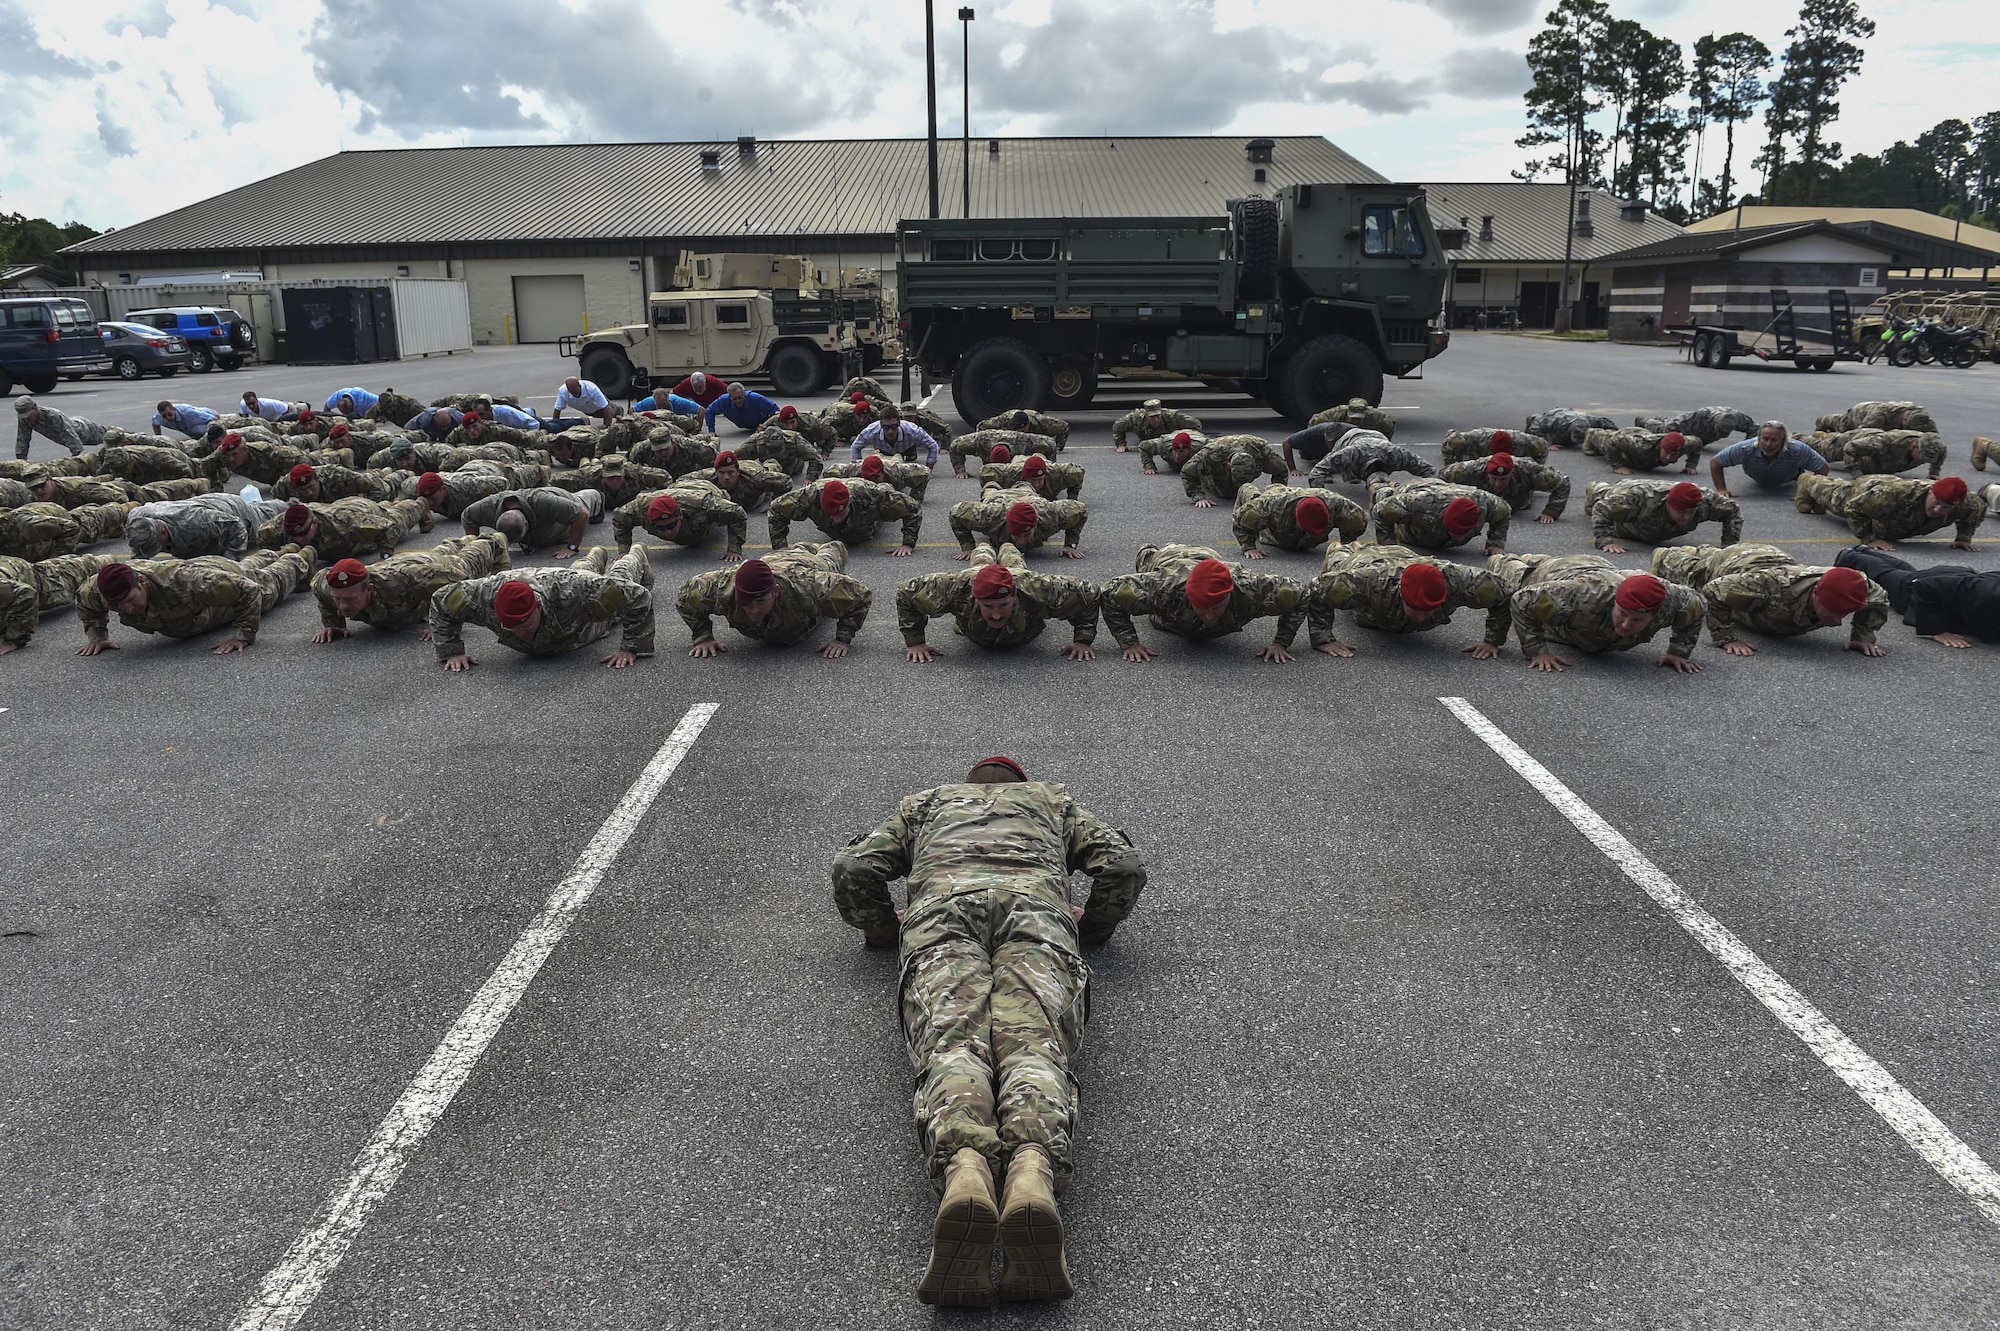 Chief Master Sgt. Sean Gleffe, combat control functional manager of Air Force Special Operations Command, leads Special Tactics Airmen in memorial pushups at Hurlburt Field, Fla., July 15, 2016. Gleffe retired after 30 years as a Special Tactics combat controller. Gleffe also served as the interim command chief of the 24th SOW. Throughout his Special Tactics career, Gleffe was certified a static line jump master, military freefall jump master and military dive supervisor. (U.S. Air Force photo by Senior Airman Ryan Conroy)